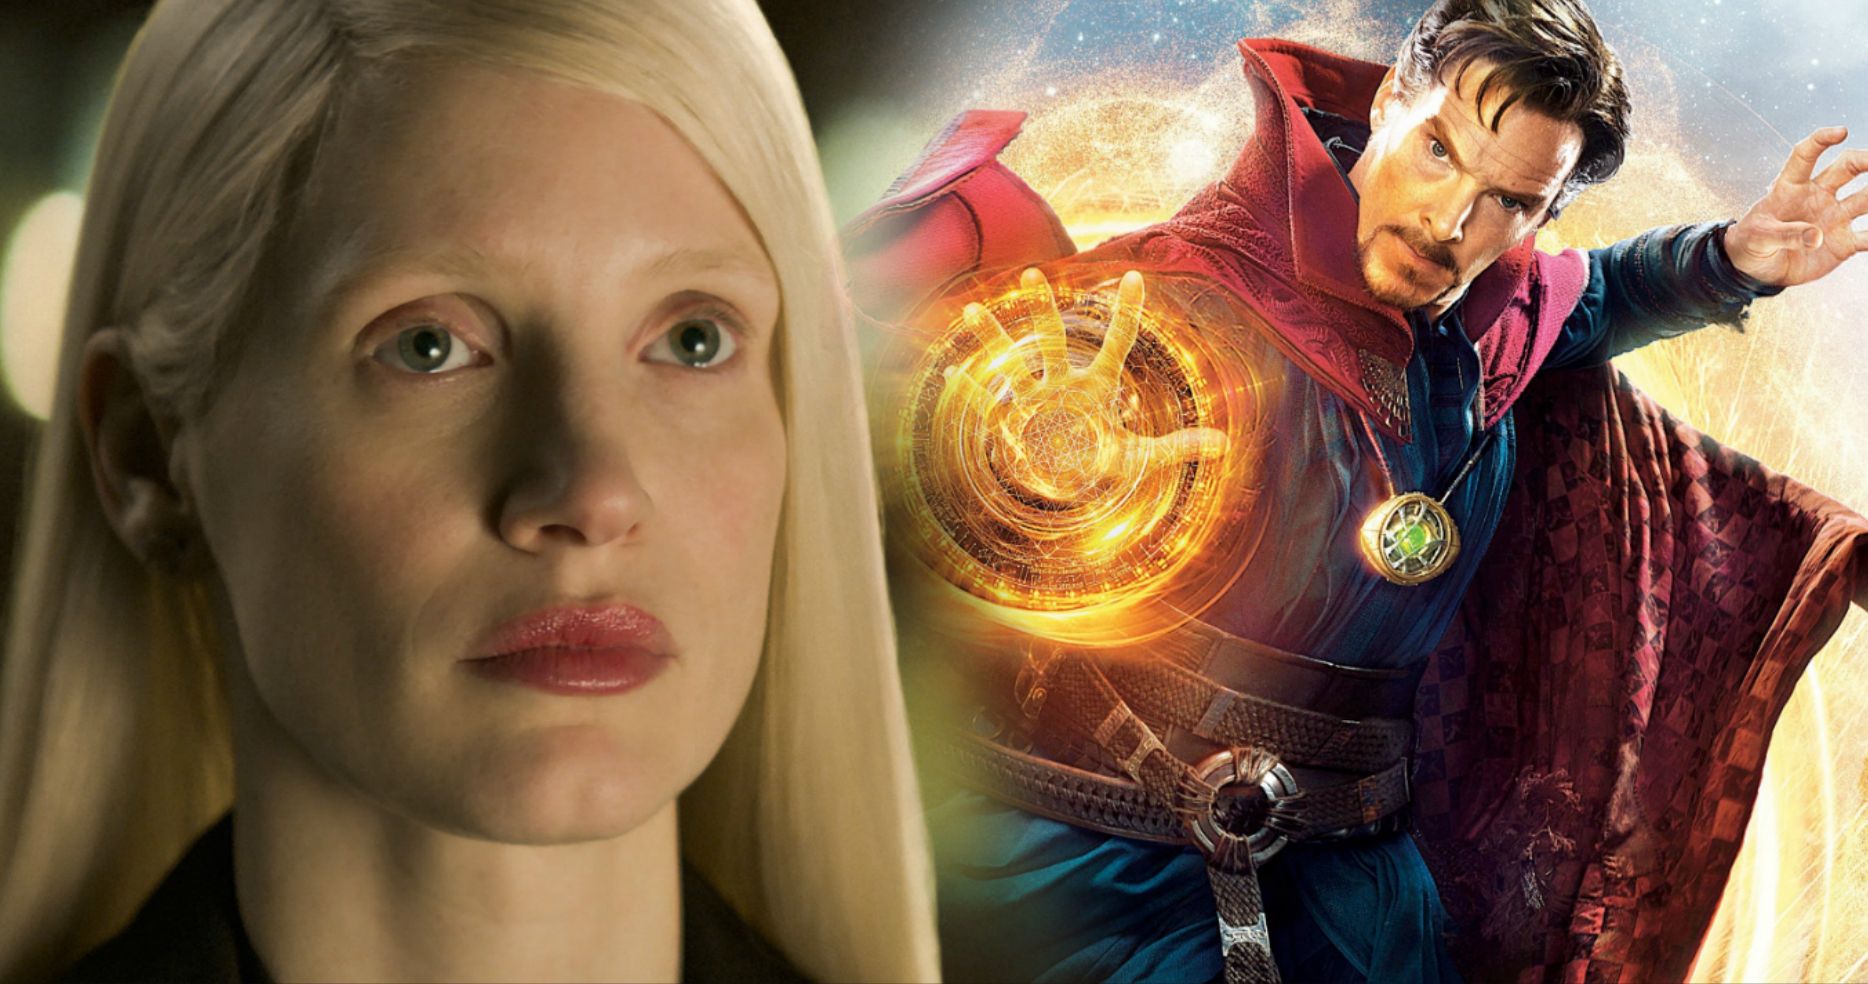 Jessica Chastain Had a Good Reason for Turning Down Doctor Strange Role